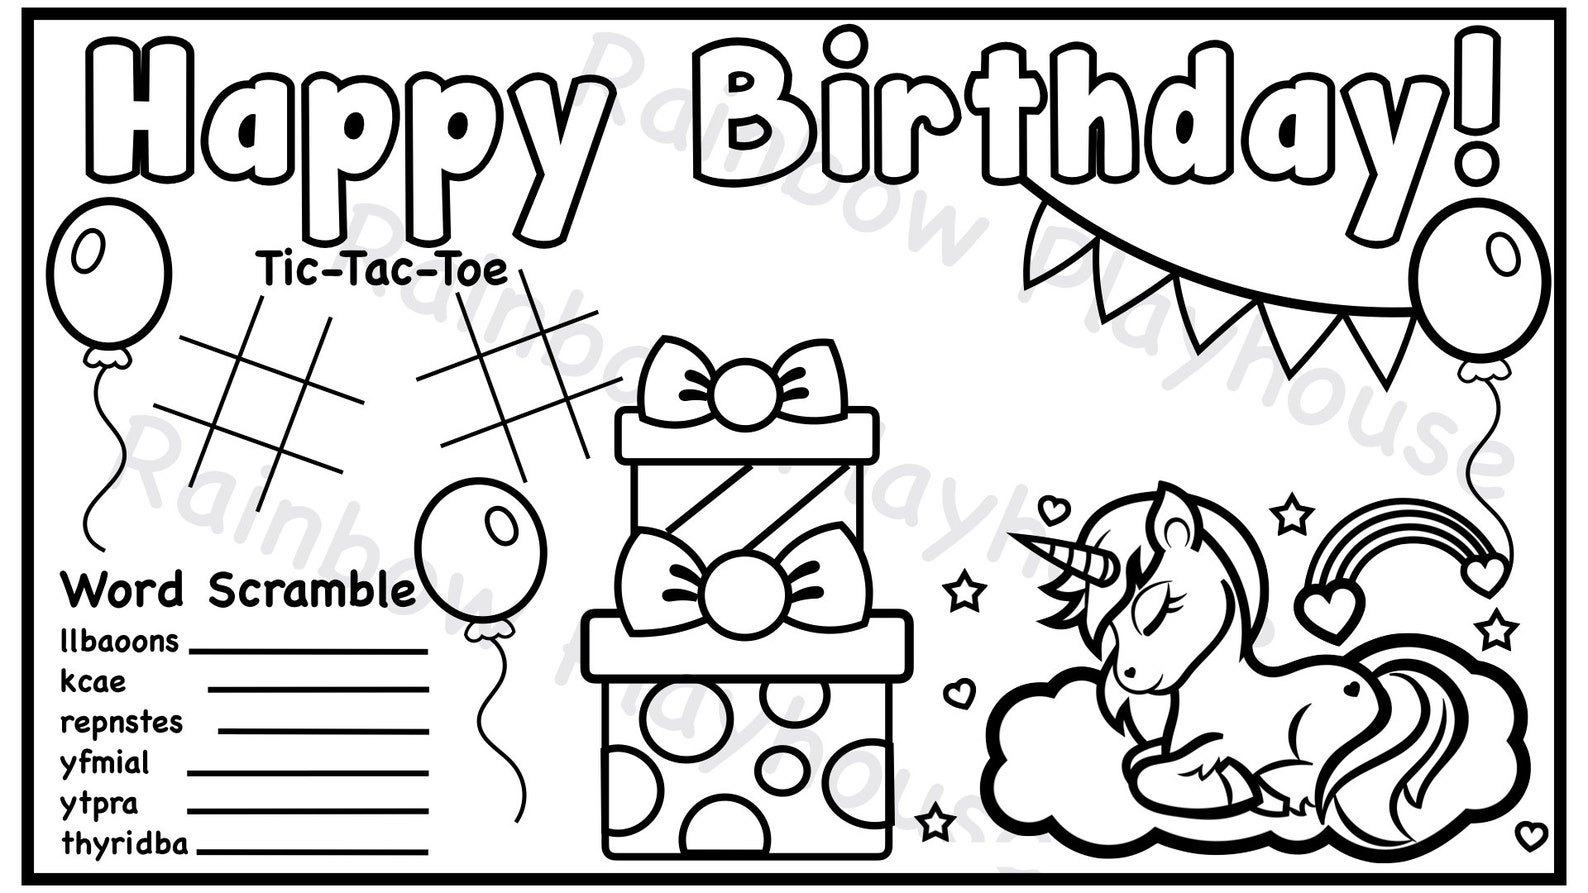 4 Happy Birthday Unicorn Themed Coloring Pages | Etsy